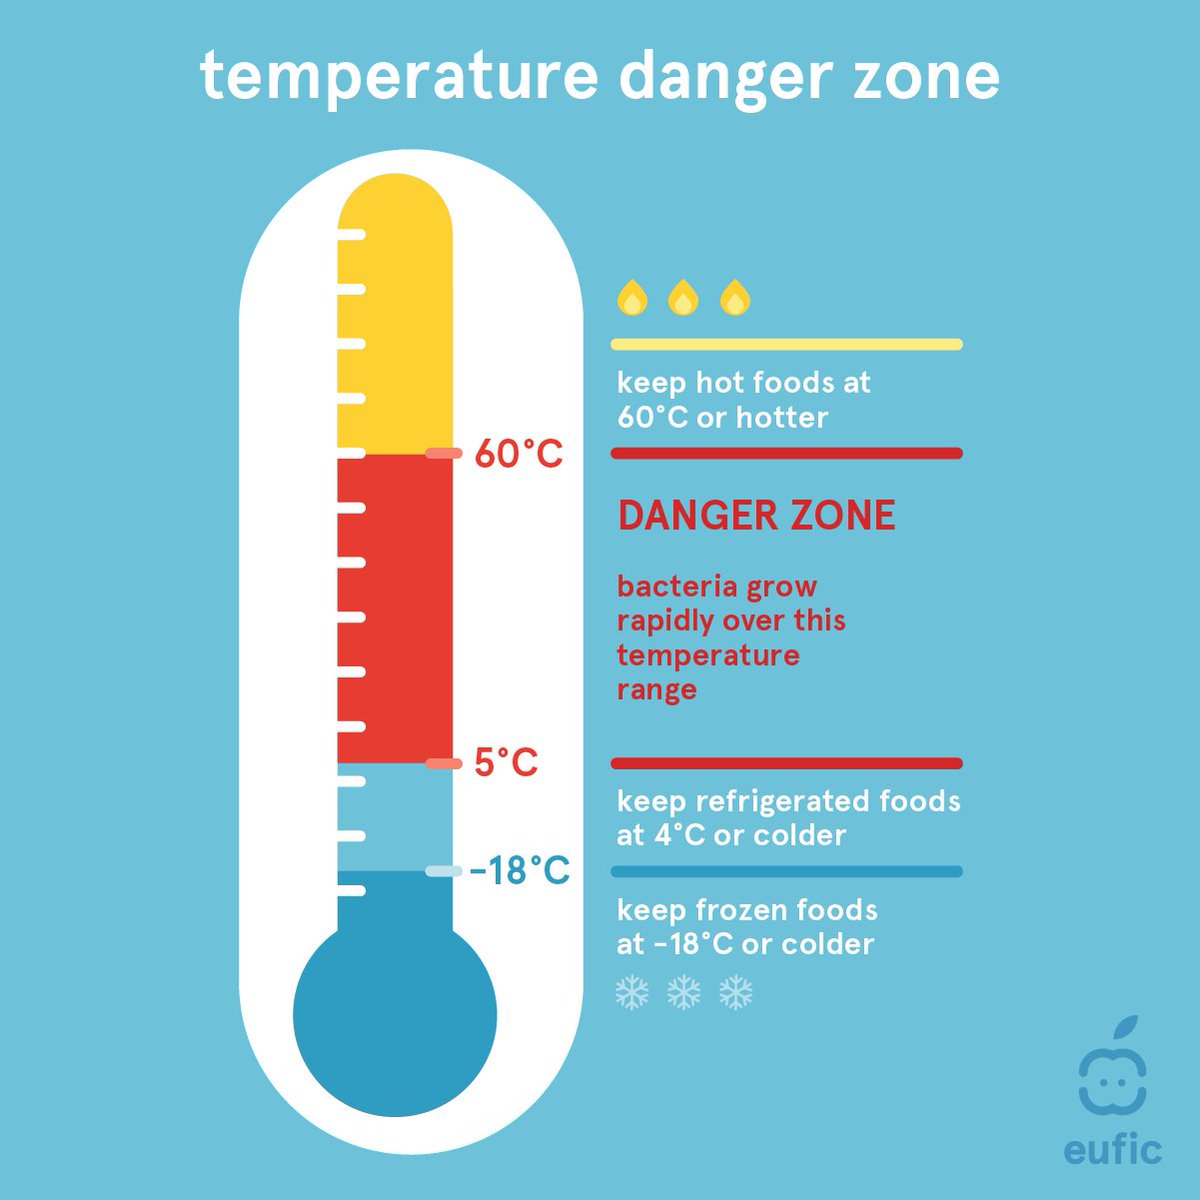 What is the Temperature Danger Zone?